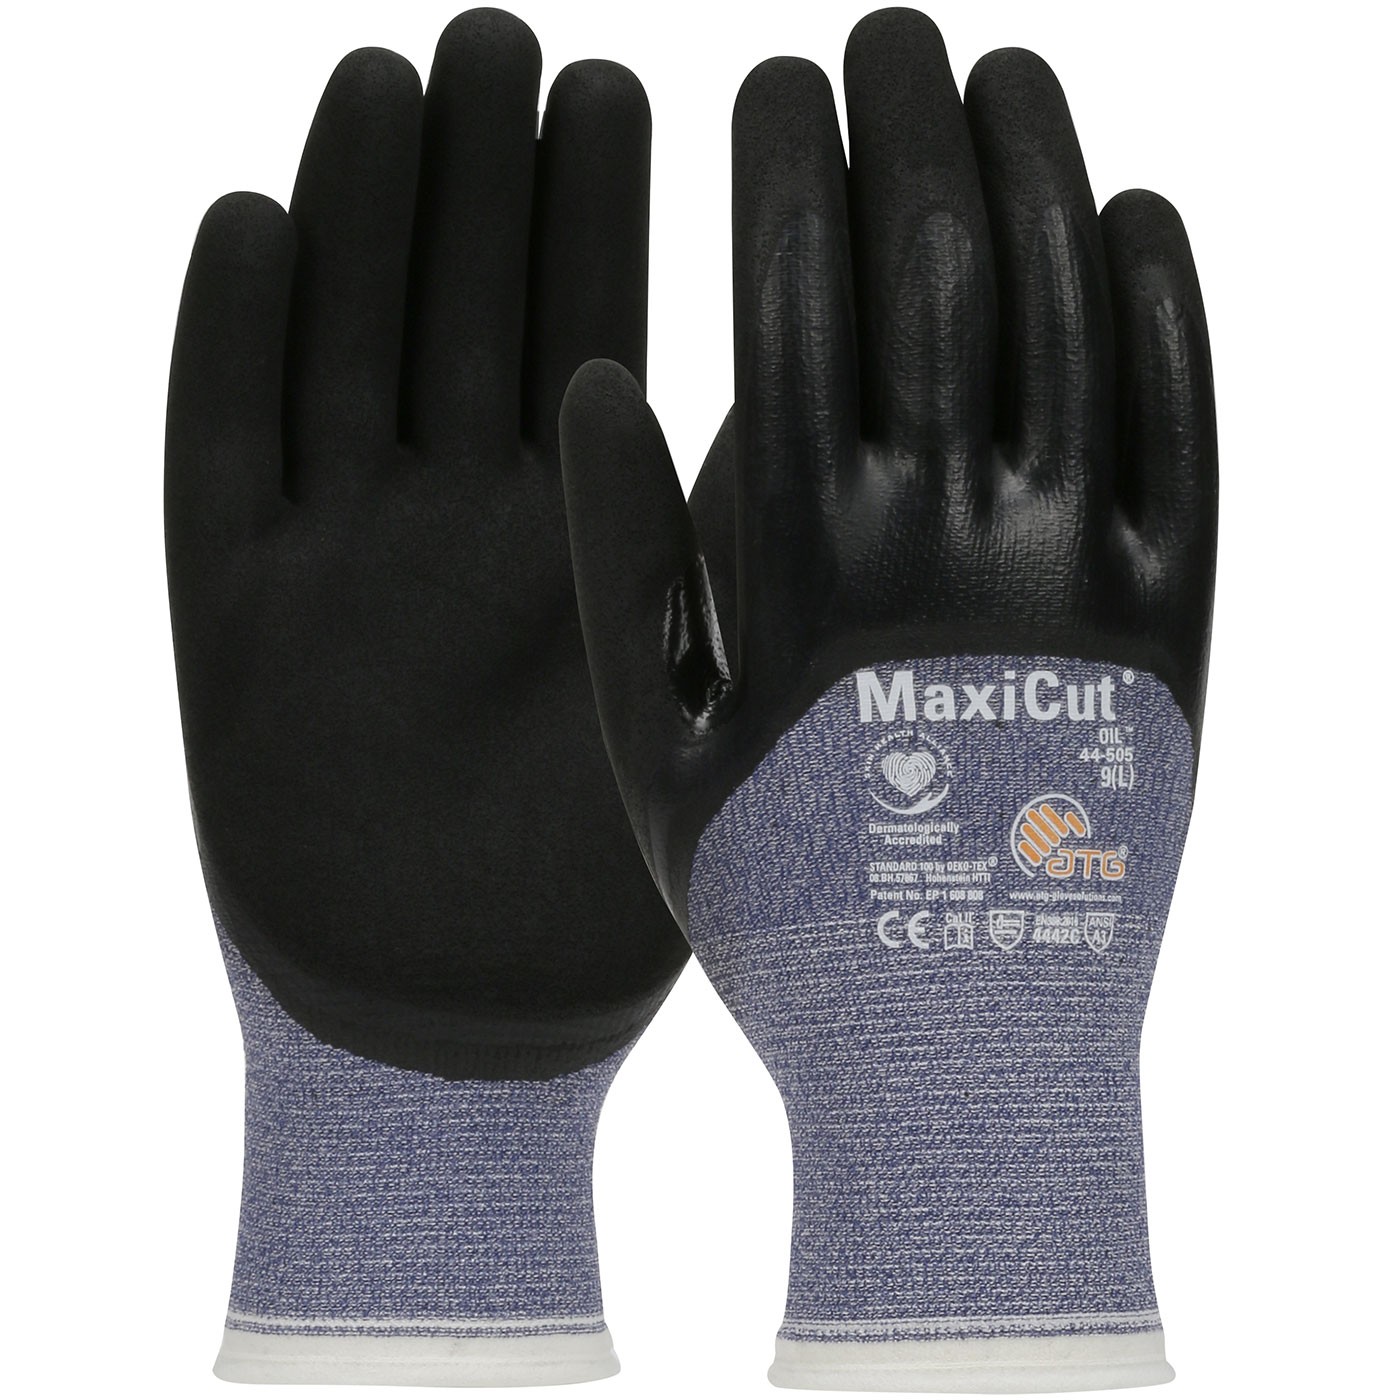 MaxiCut® Oil Seamless Knit Engineered Yarn Glove with Nitrile Coated MicroFoam Grip on Palm, Fingers & Knuckles  (#44-505)